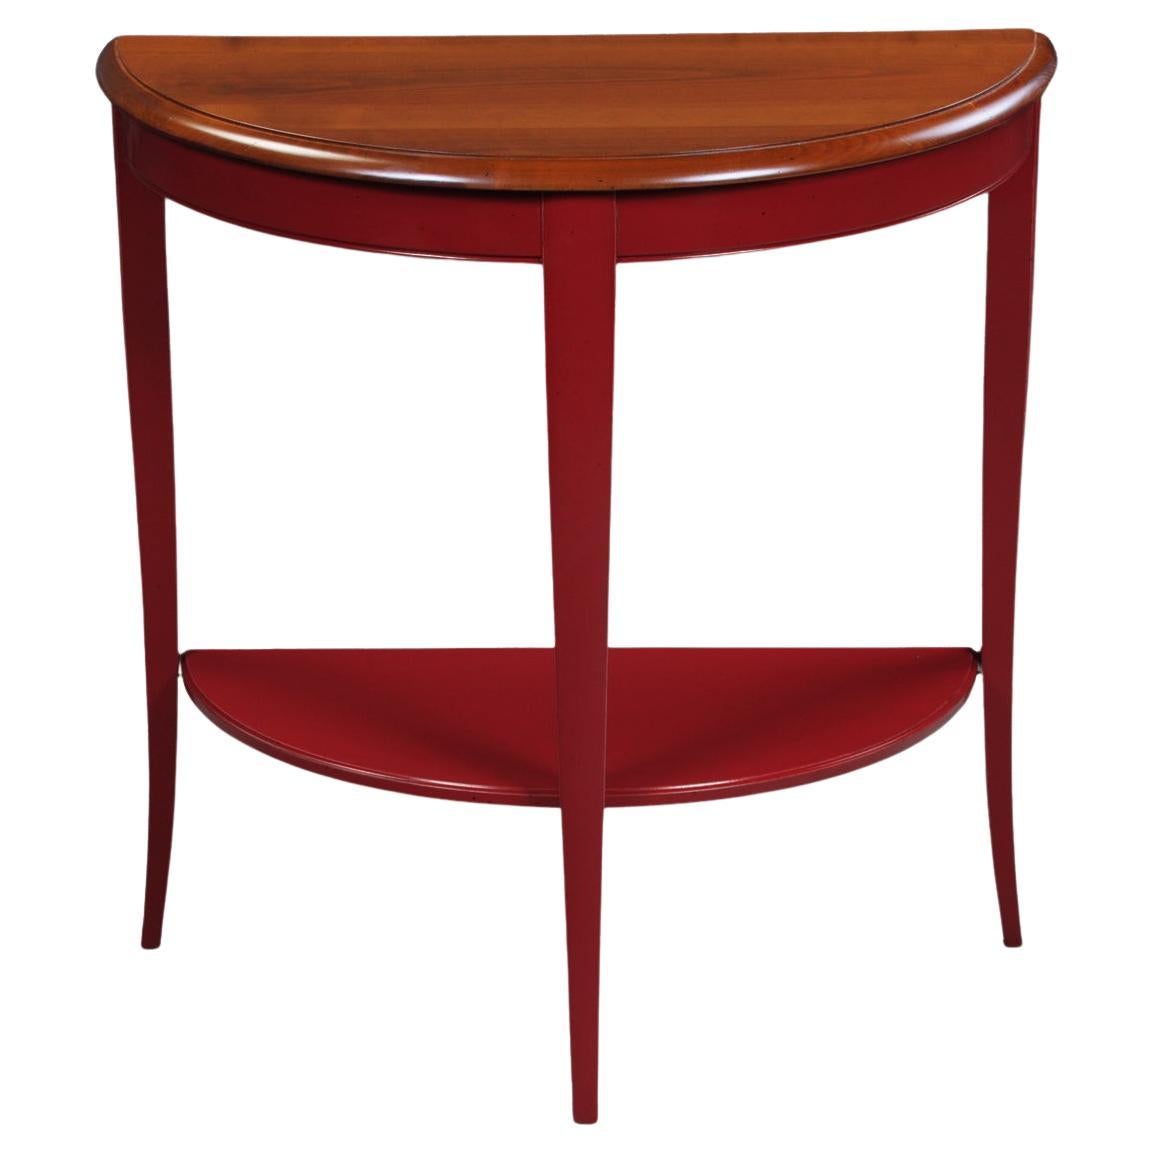 French provincial demi-lune console table in solid cherry,  Bordeaux lacquered